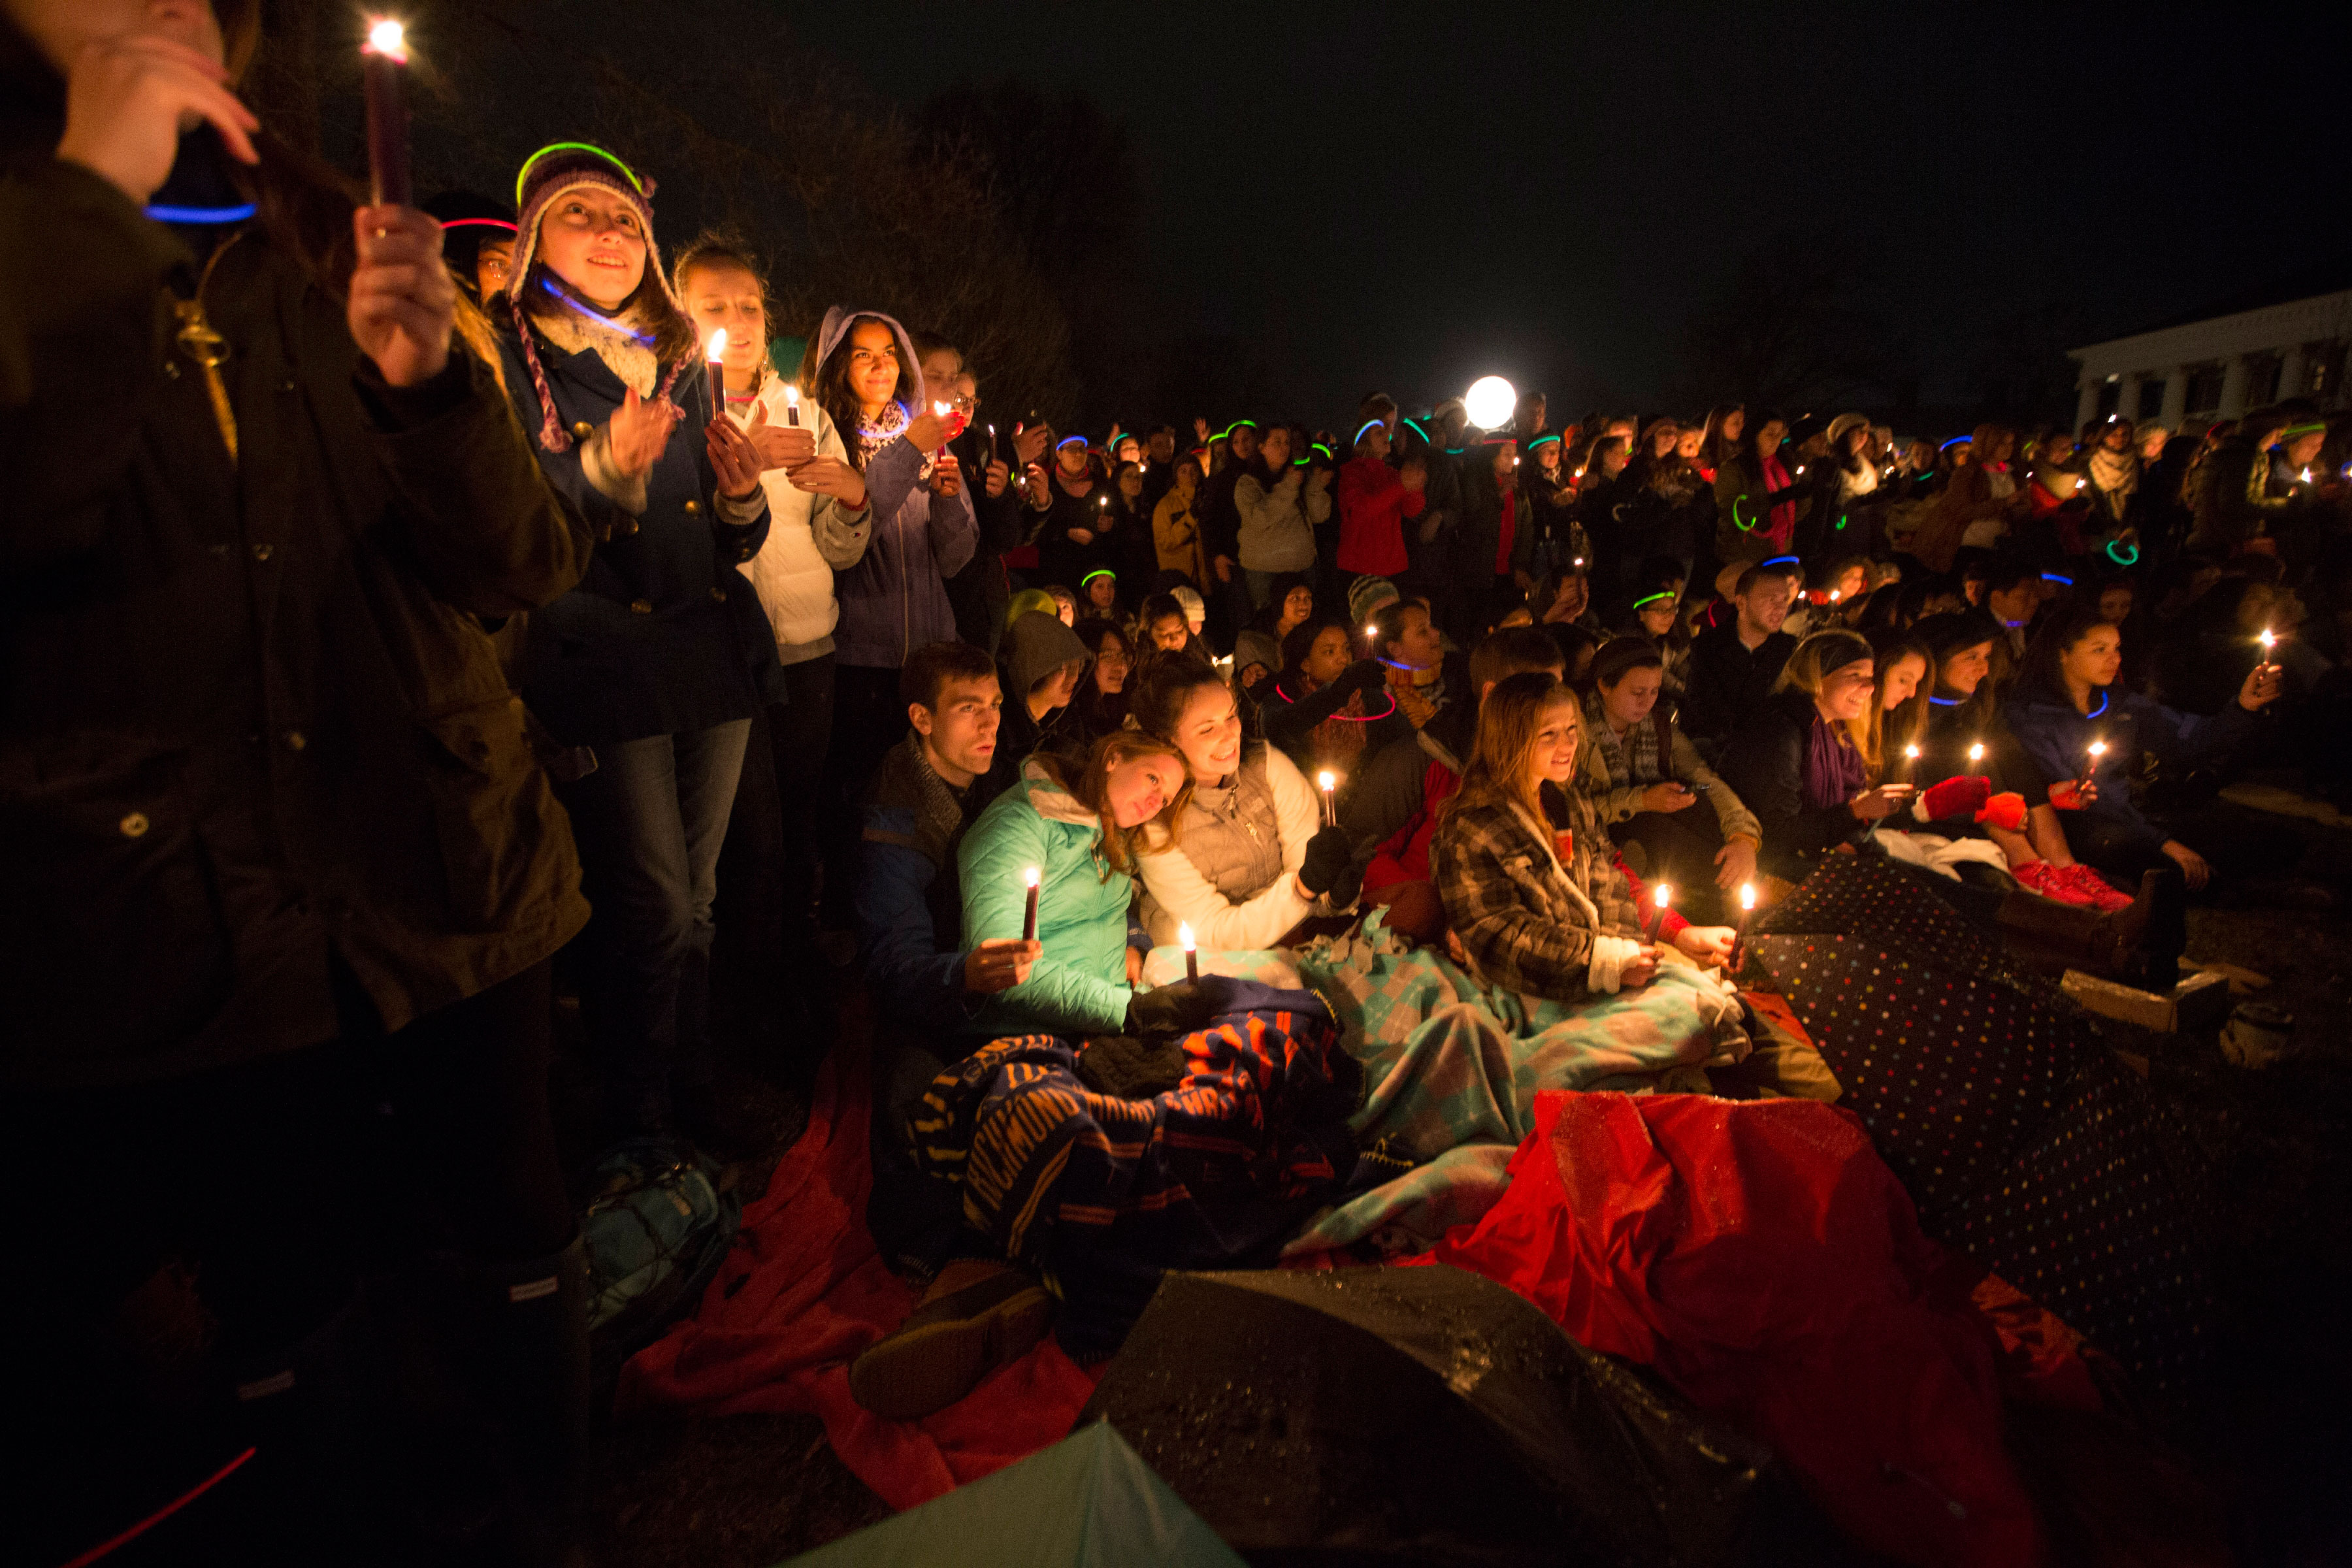 Crowd holding Lights standing close and some sitting on the ground with blankets